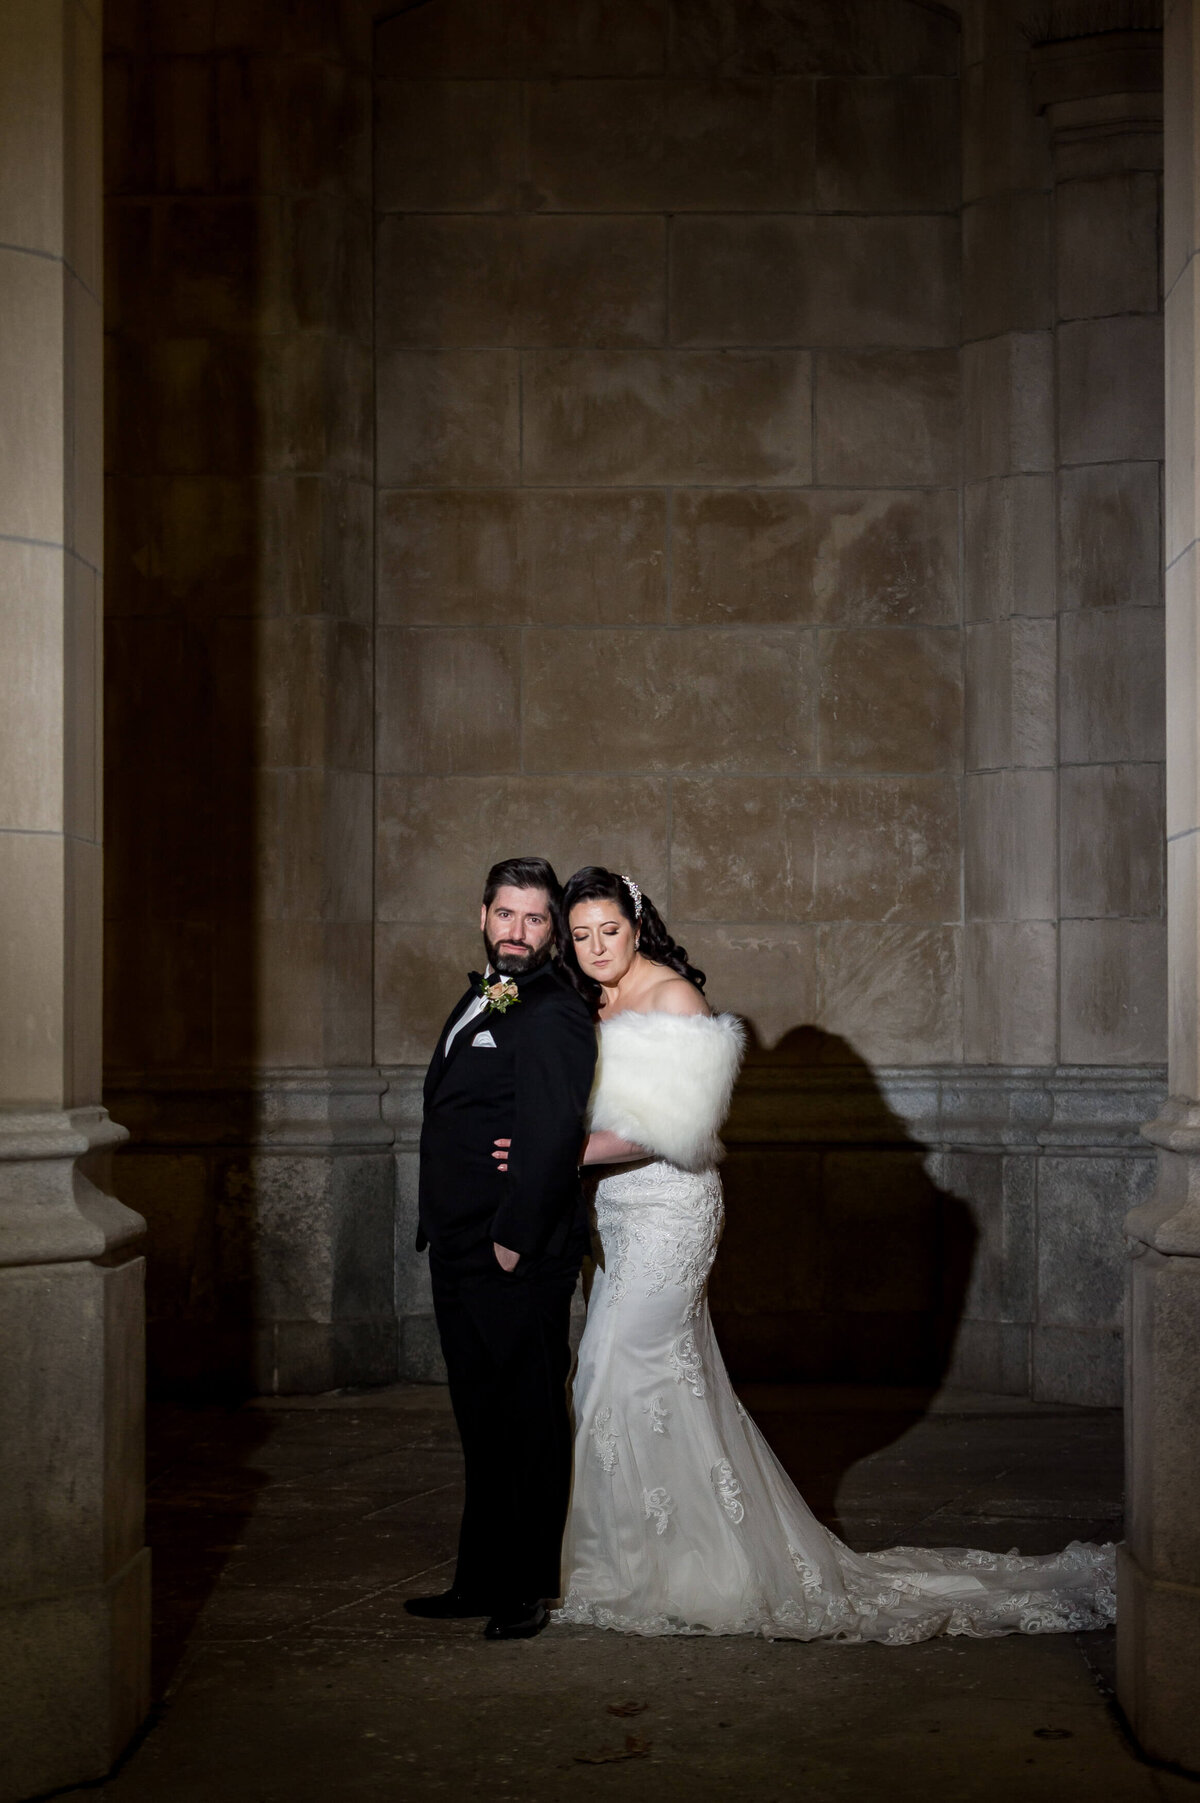 Ottawa wedding photography of a bride in a white dress and a groom in a black tux outside the Chateau Laurier hotel